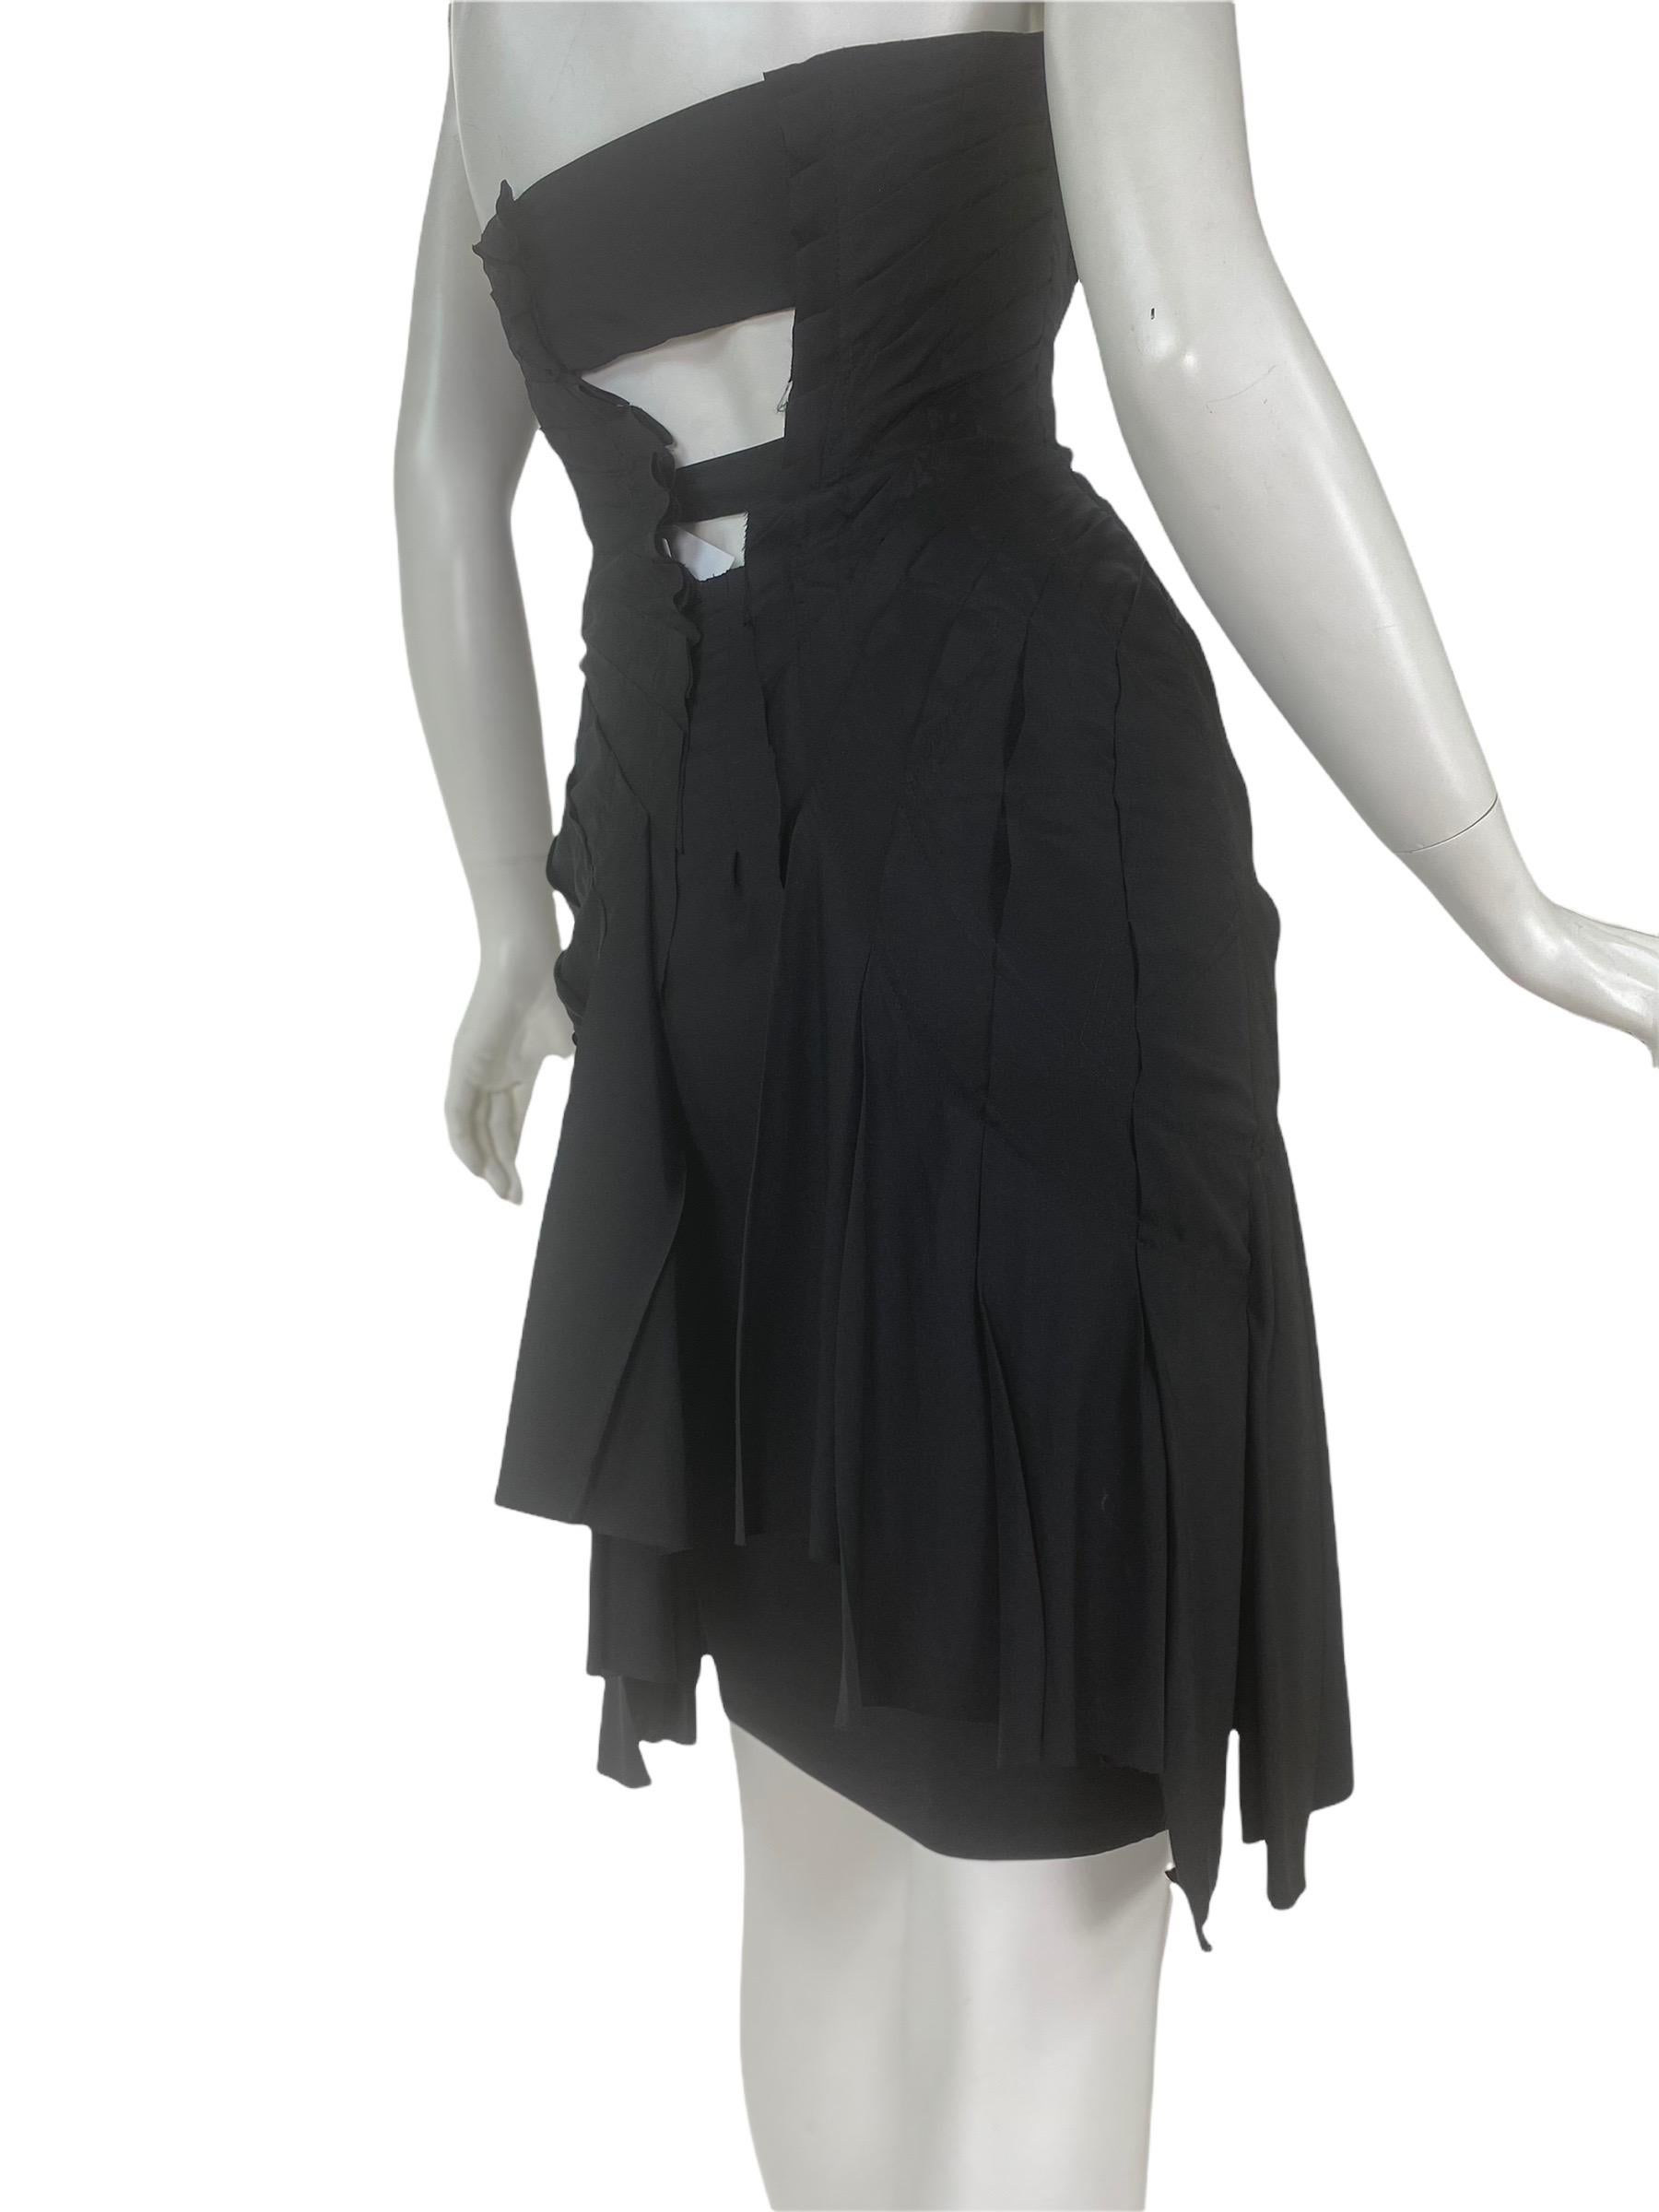 Women's S/S 2004 Vintage Tom Ford for Gucci Strapless Black Silk Dress 40 For Sale